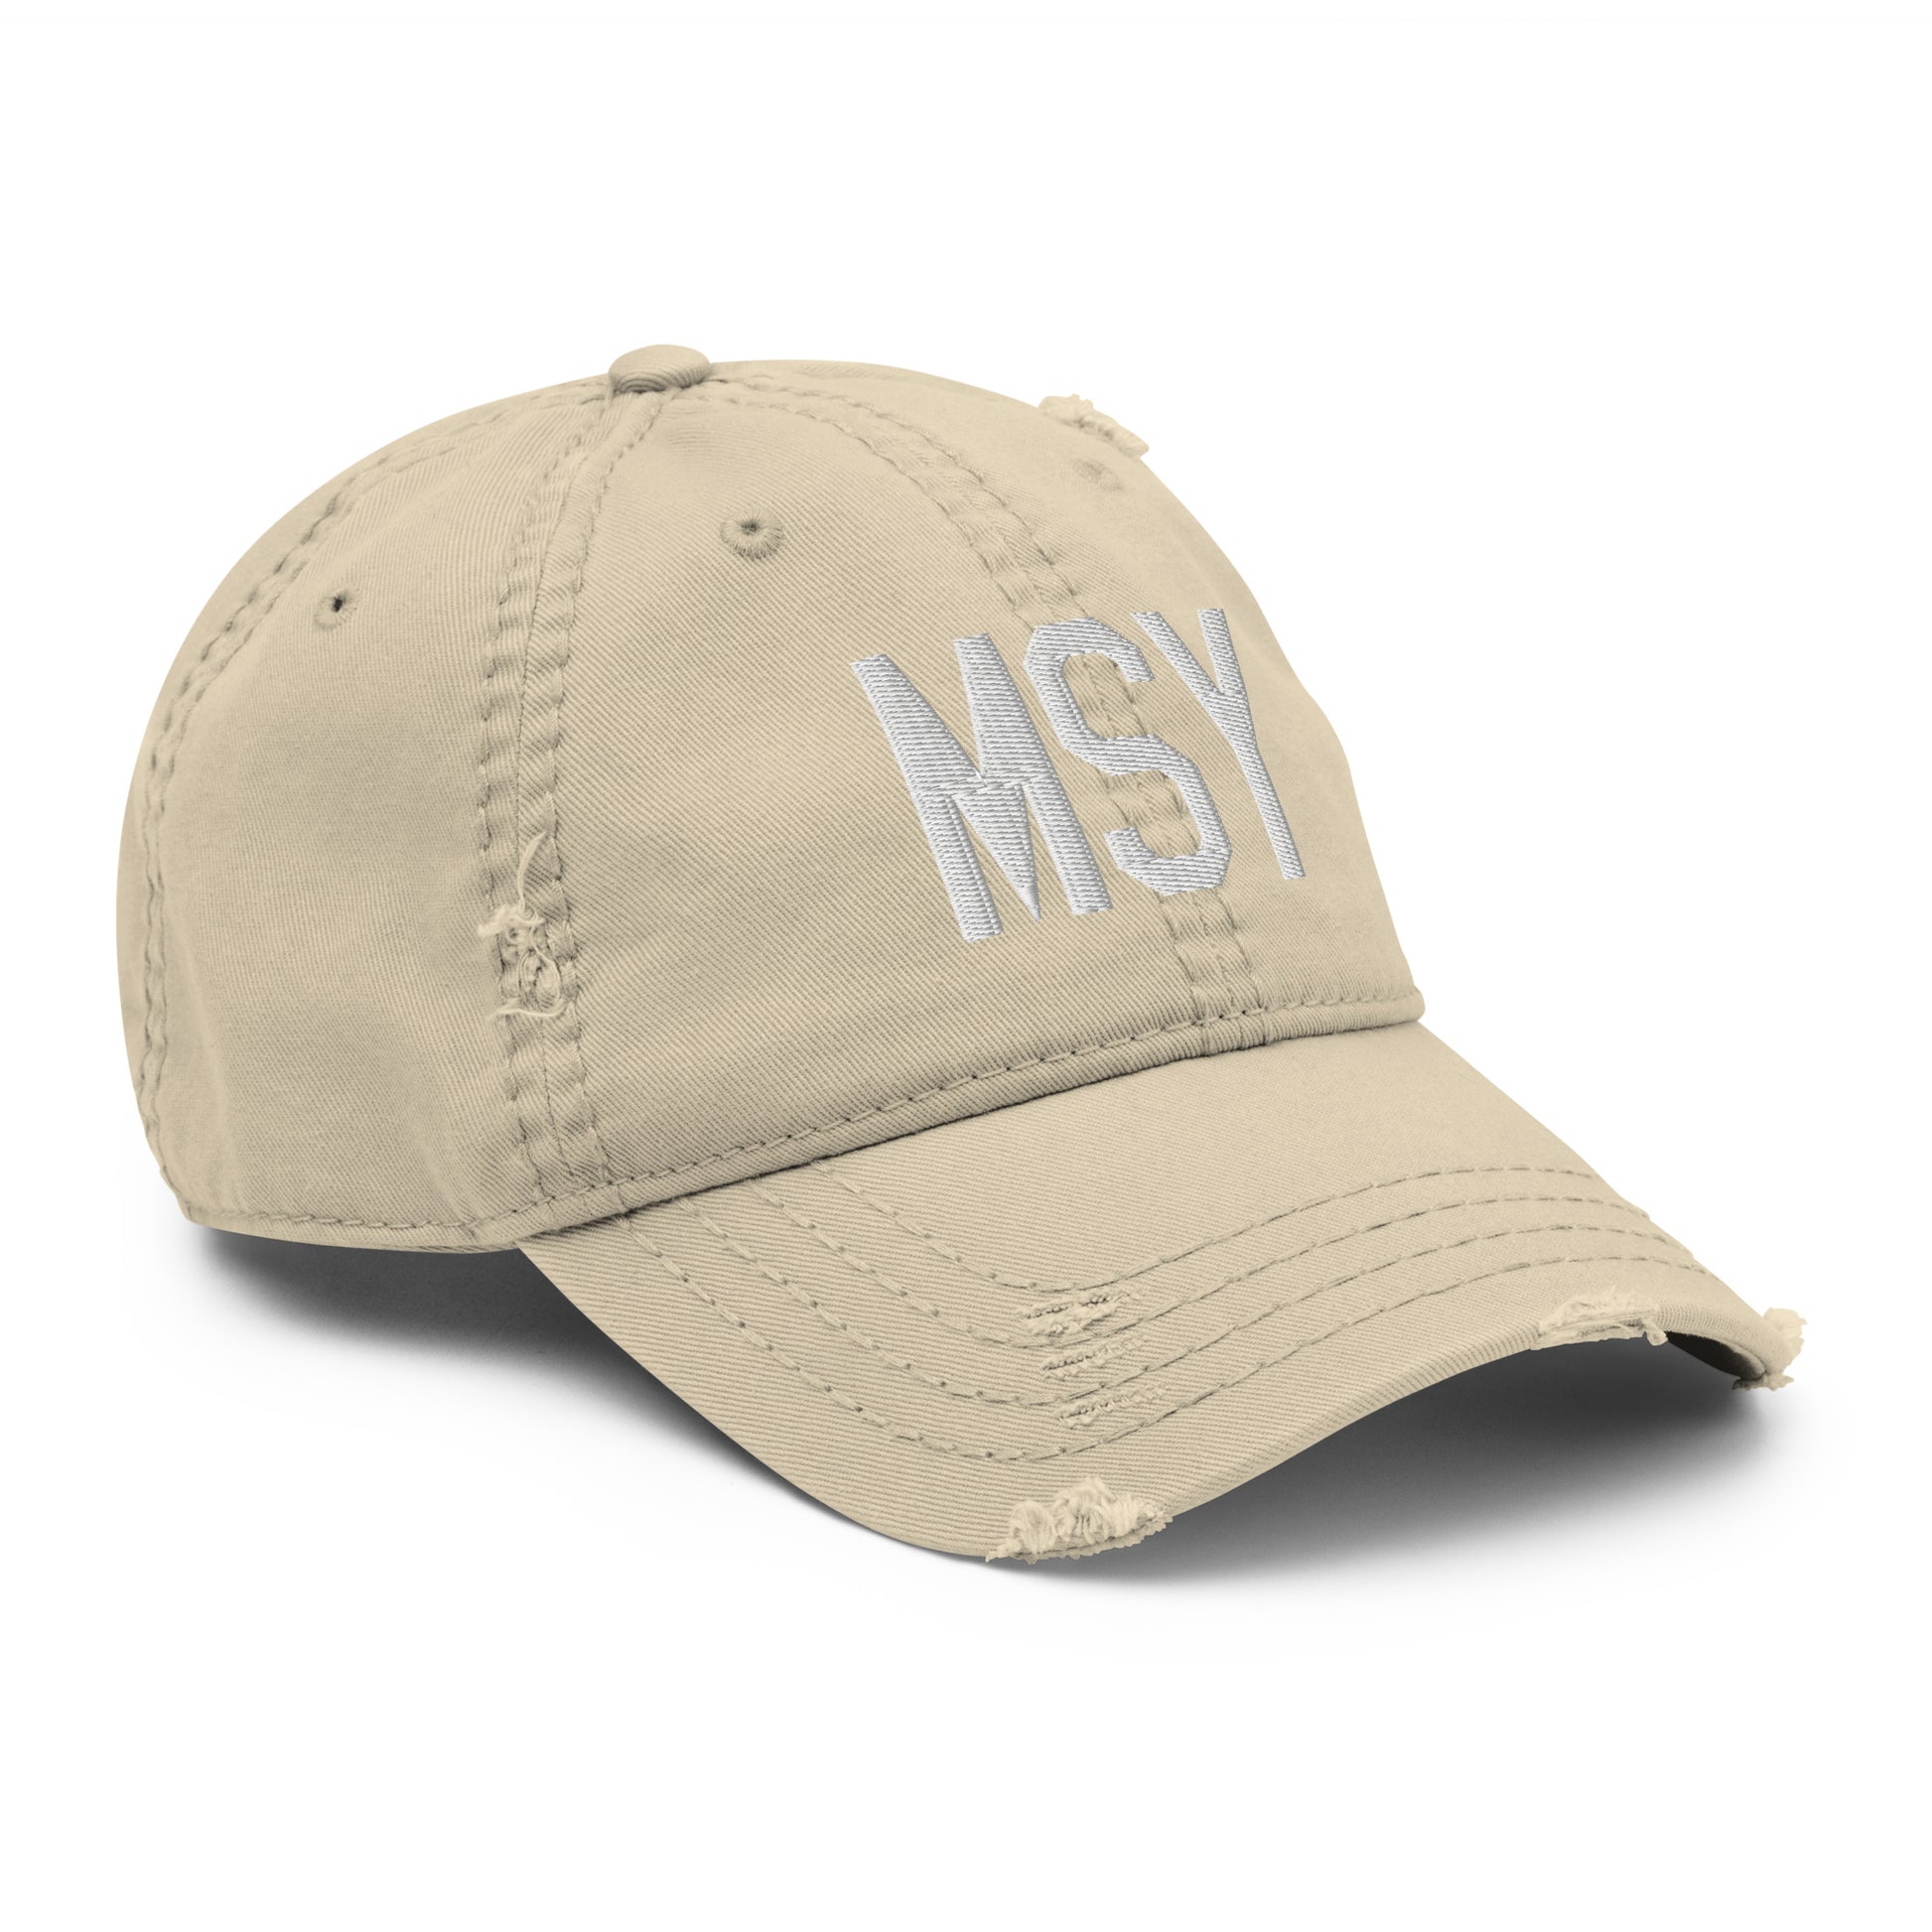 Airport Code Distressed Hat - White • MSY New Orleans • YHM Designs - Image 20